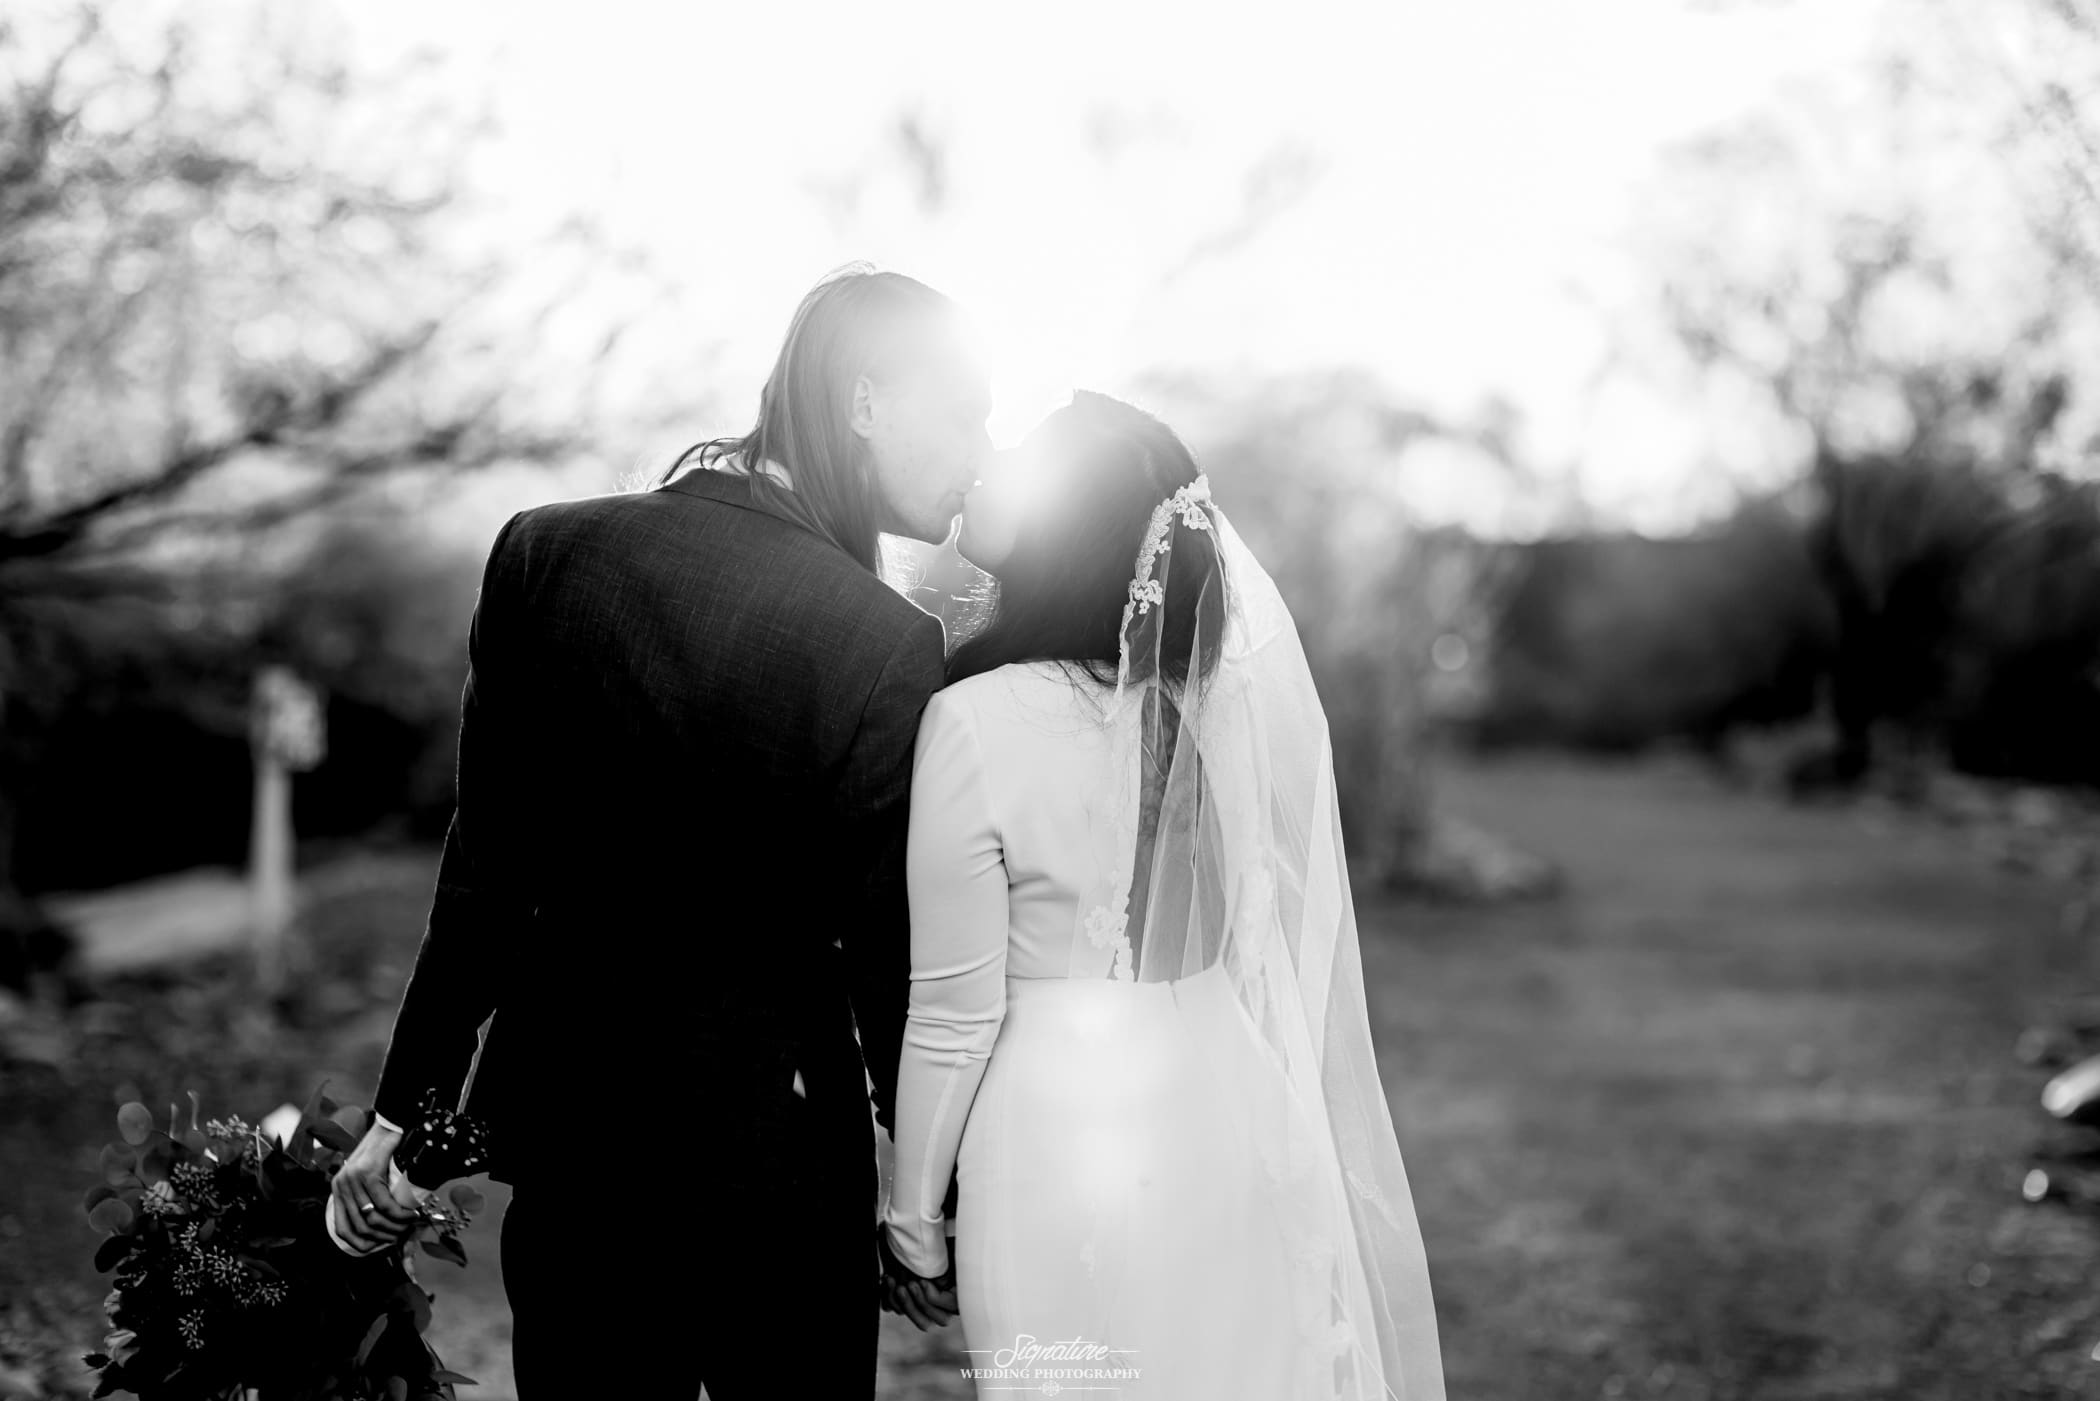 Behind shot of bride and groom kissing black and white